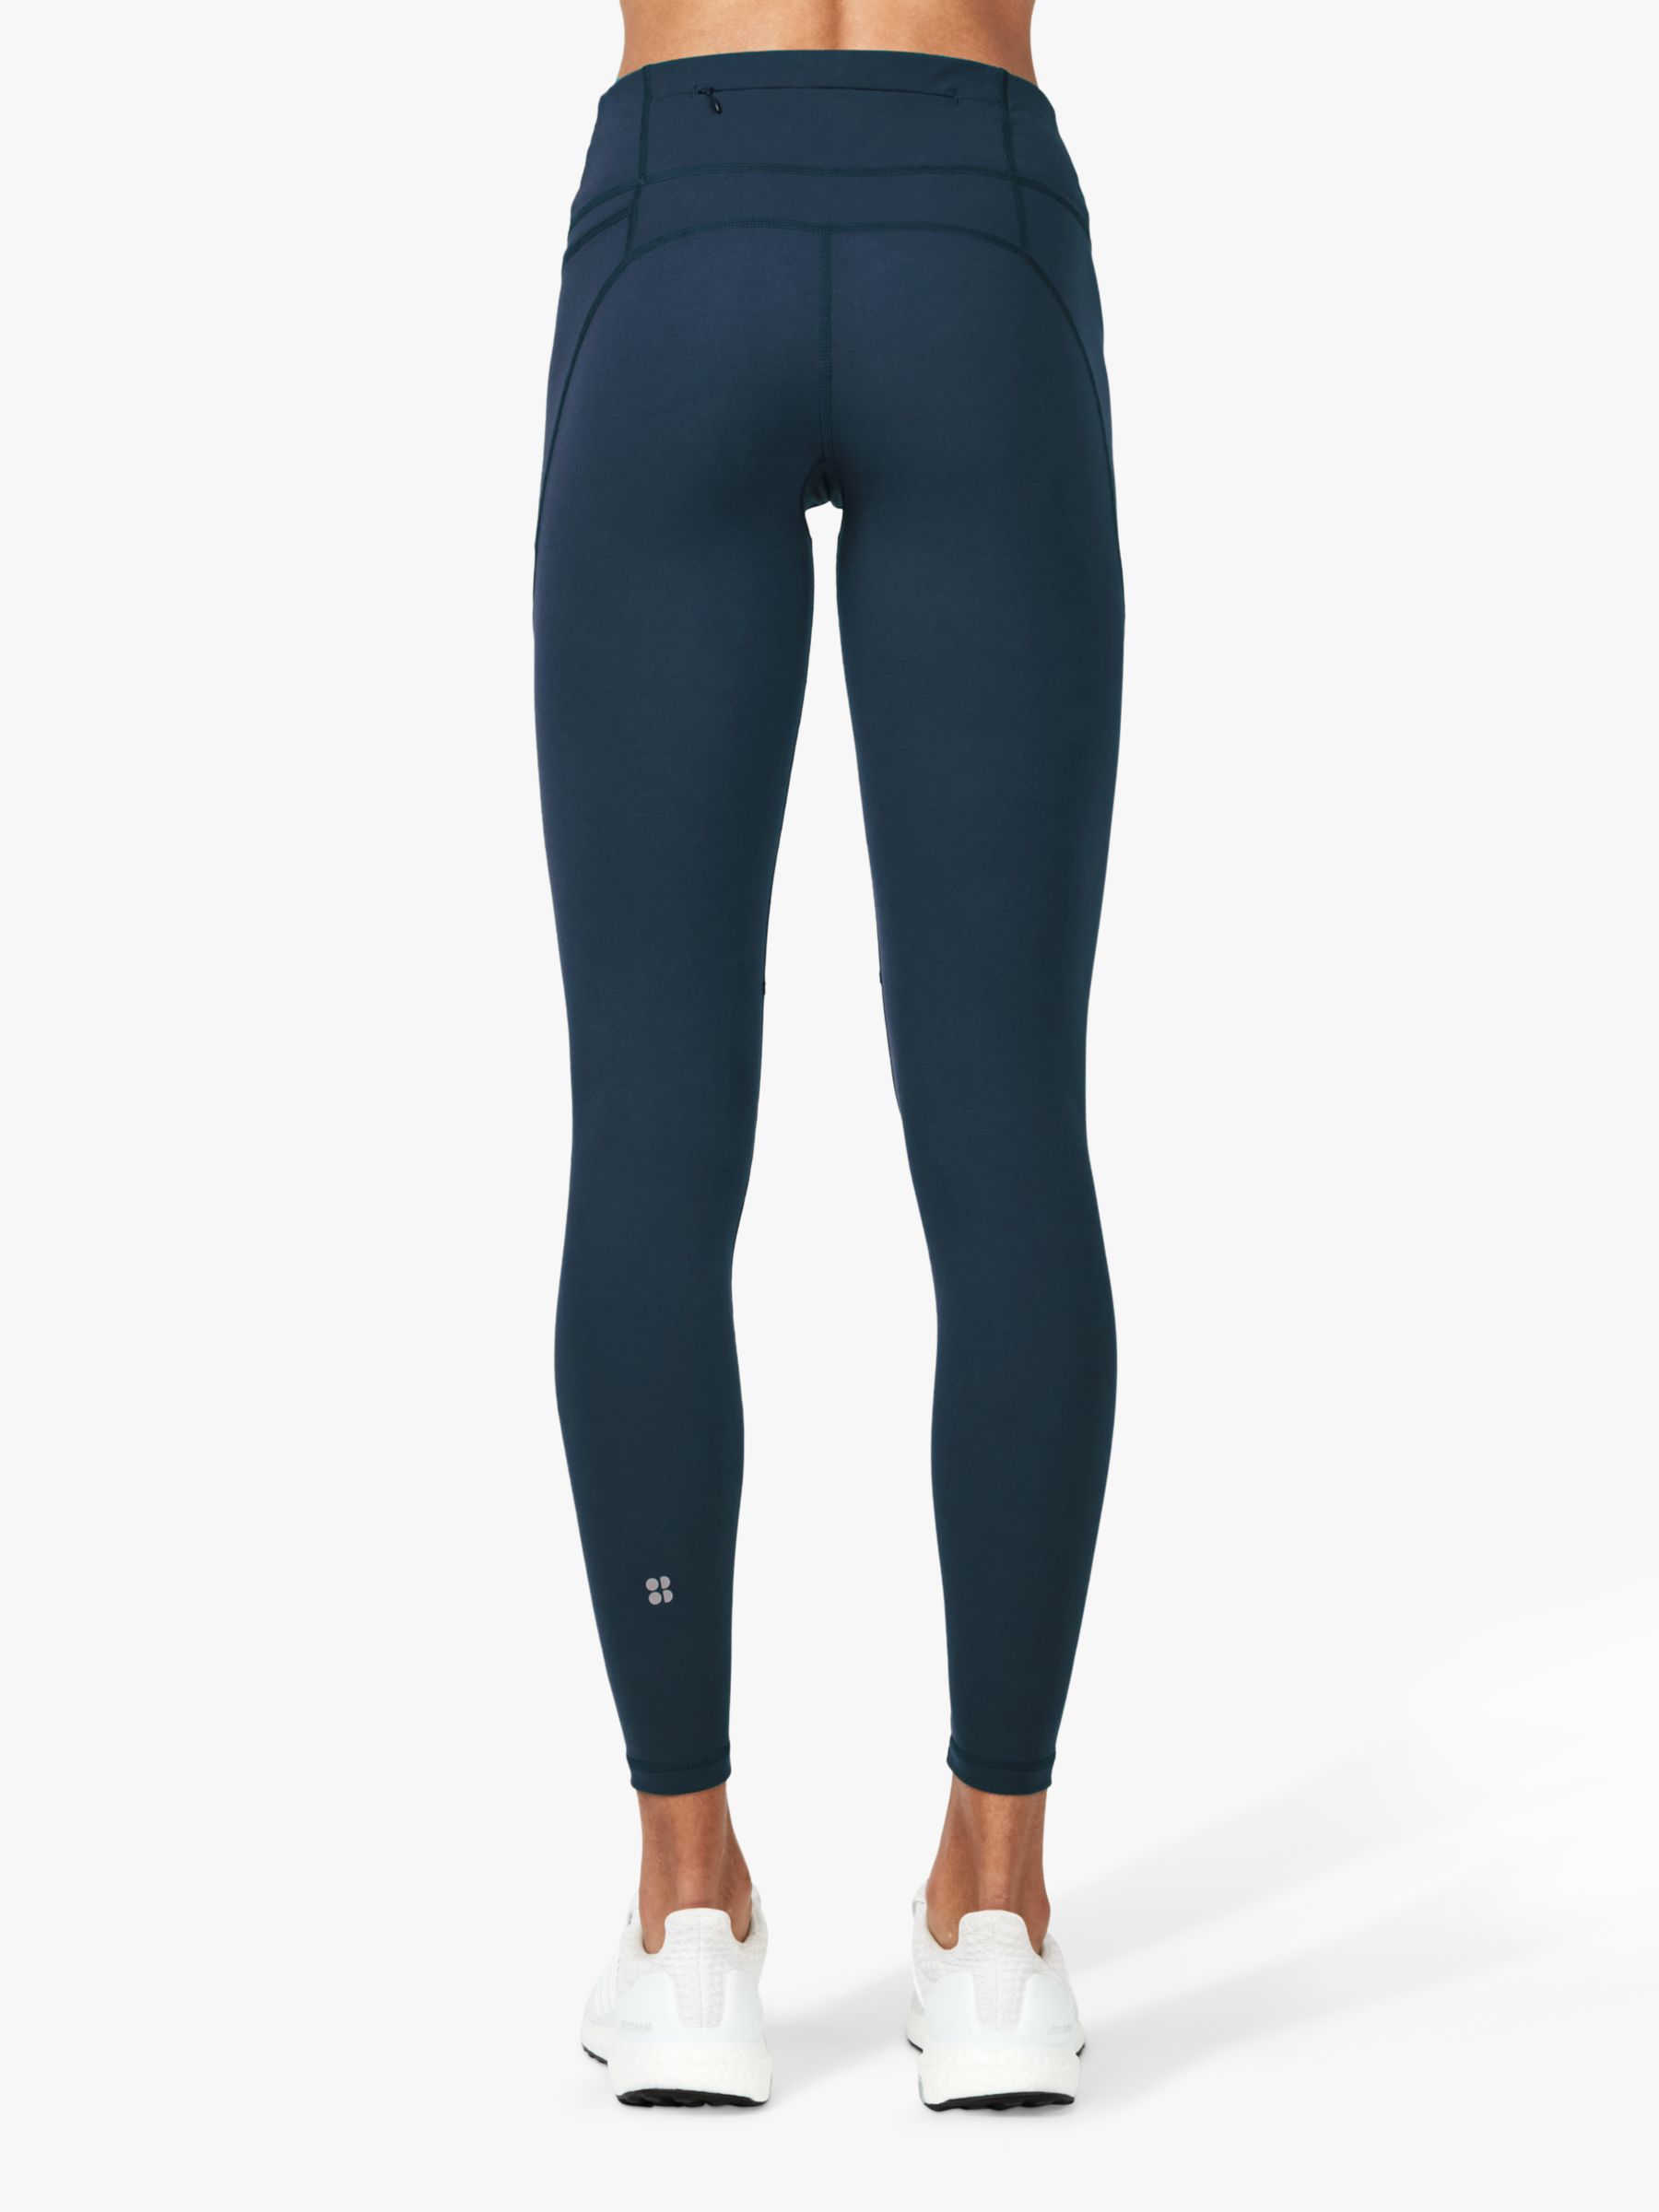 Sweaty Betty power leggings review beetle blue-8 - Agent Athletica